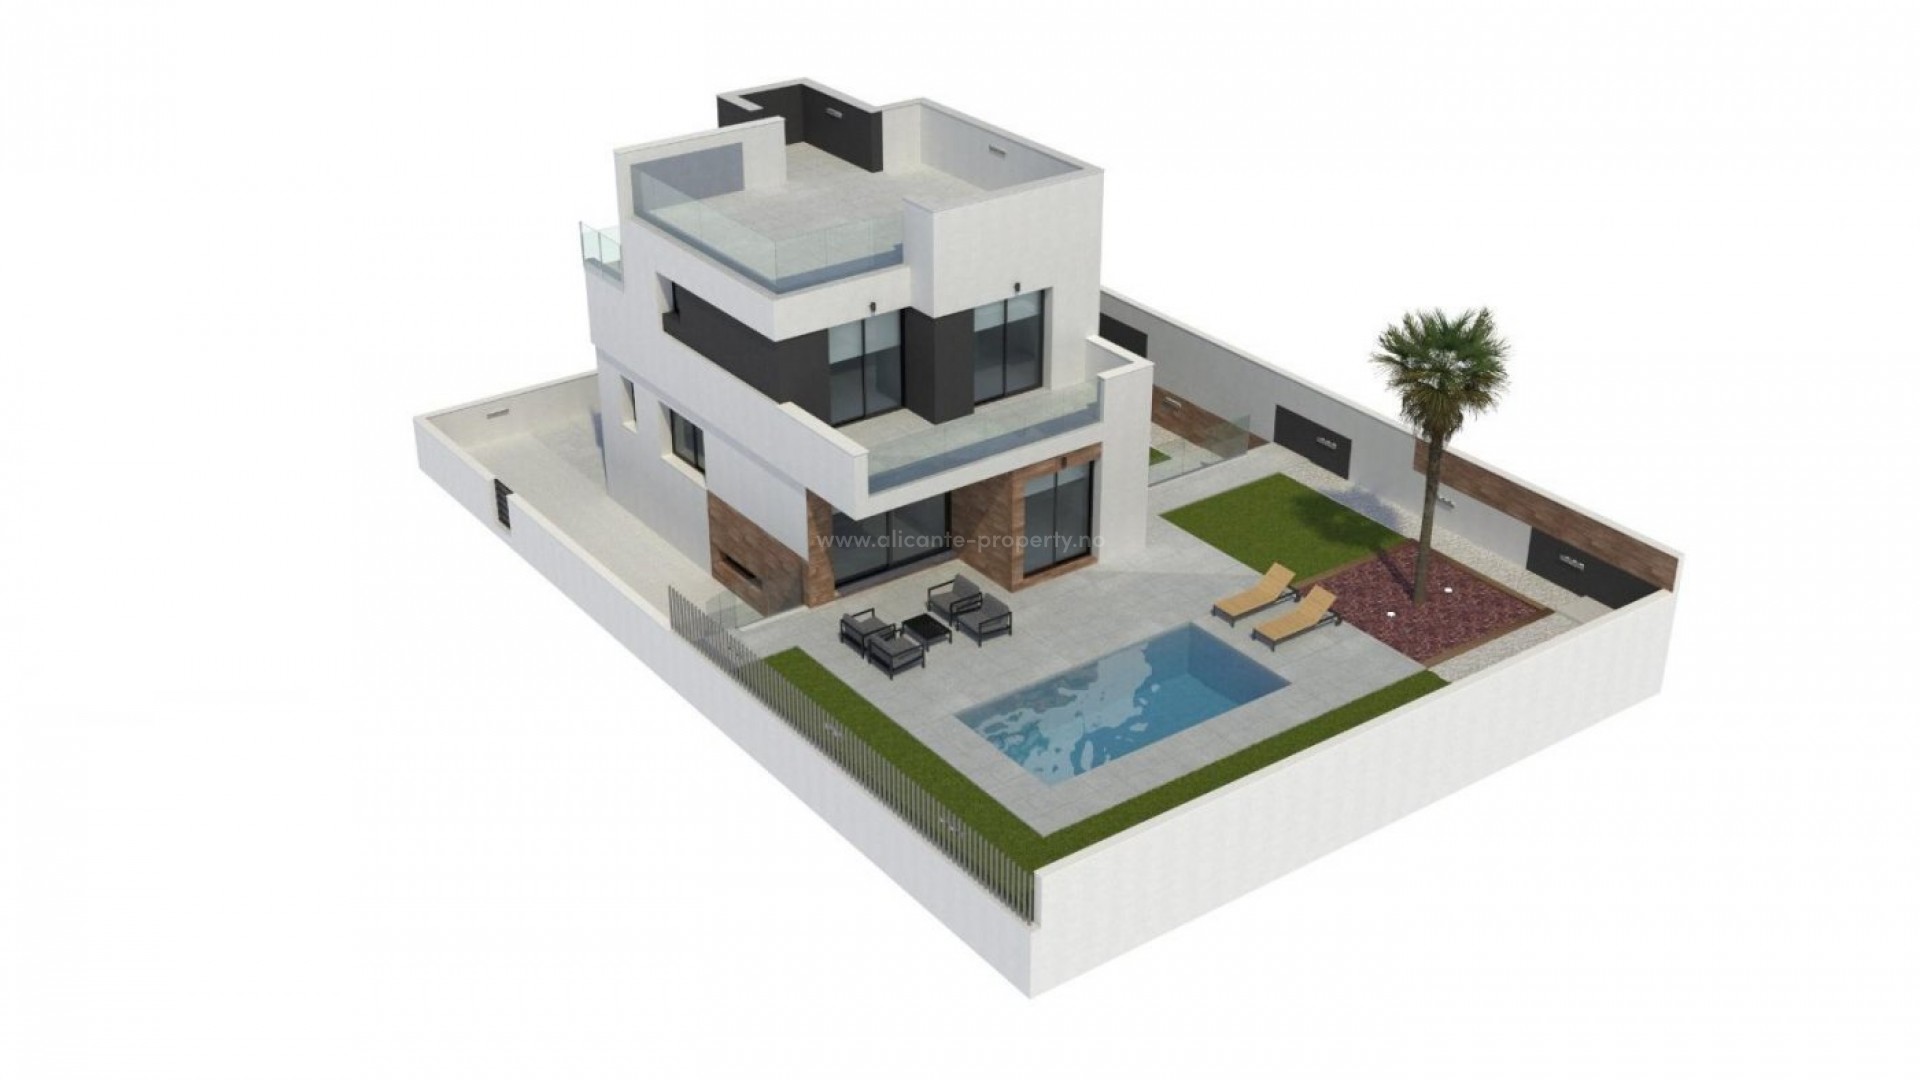 New houses/villas in La Nucia near Benidorm, 3 large bedrooms, 4 bathrooms, private pool, terrace, solarium and separate garage for 2 cars,